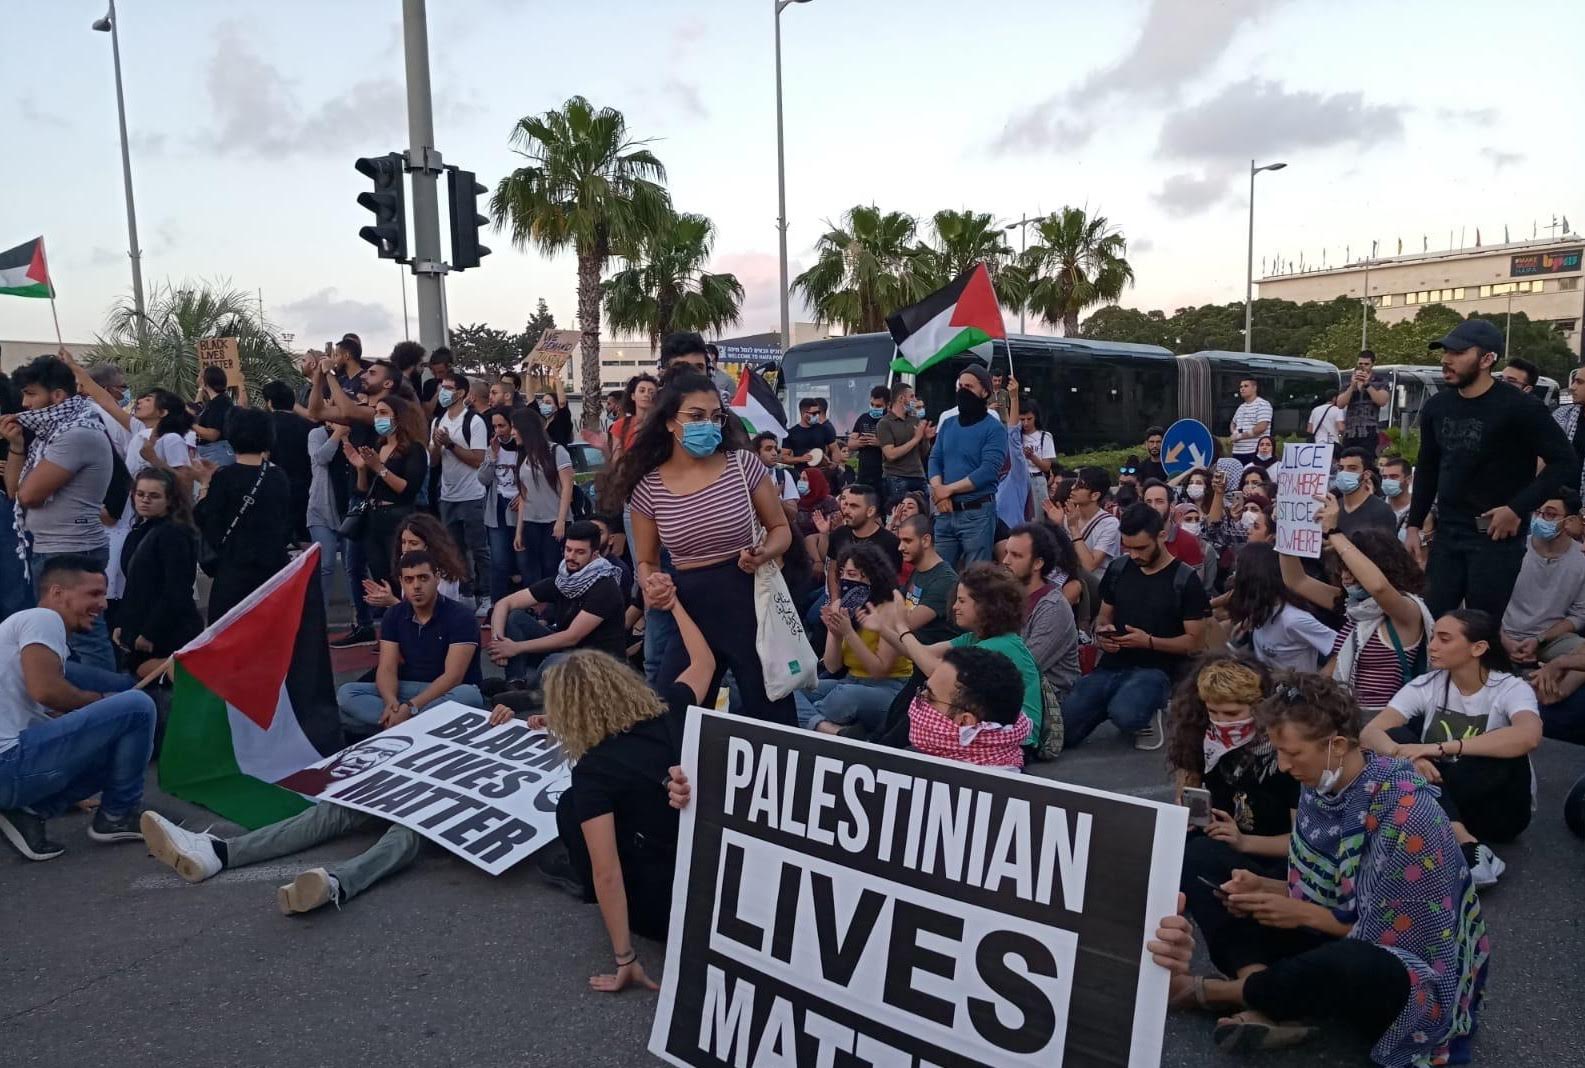 Protesters hold “Black Lives Matter” and “Palestinian Lives Matter” signs in Haifa, Israel, in June 2020 (MEE/Mohamad Kadan)